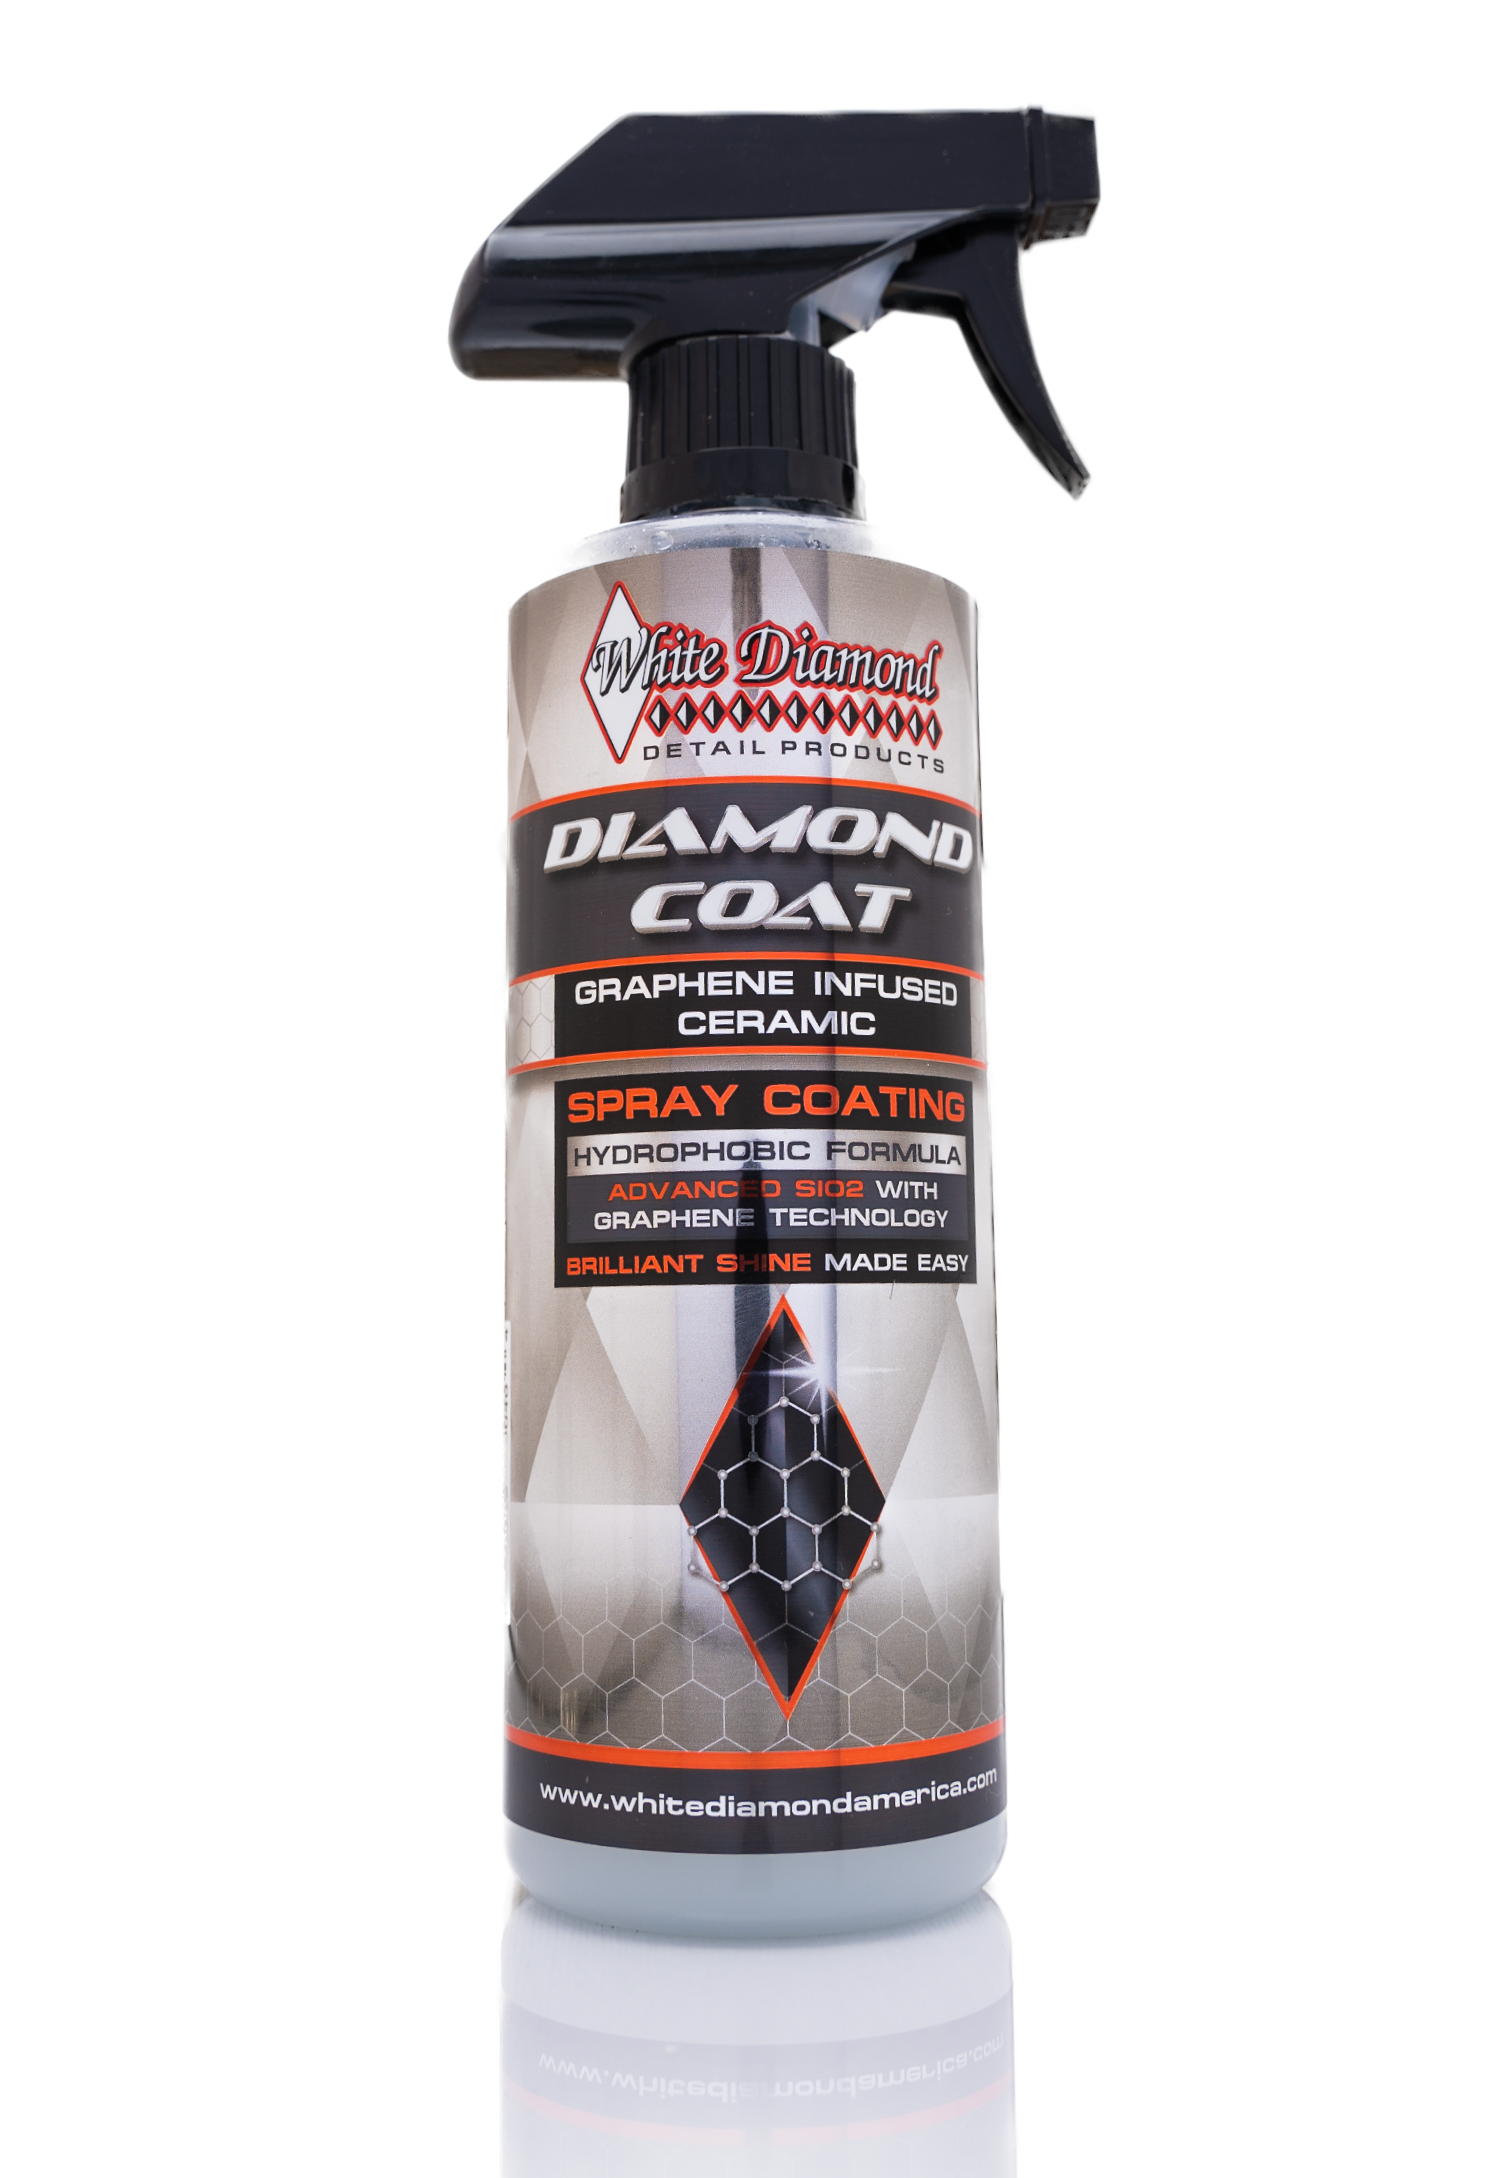 White Diamond Detail Products (@whitediamonddetailproducts) • Instagram  photos and videos